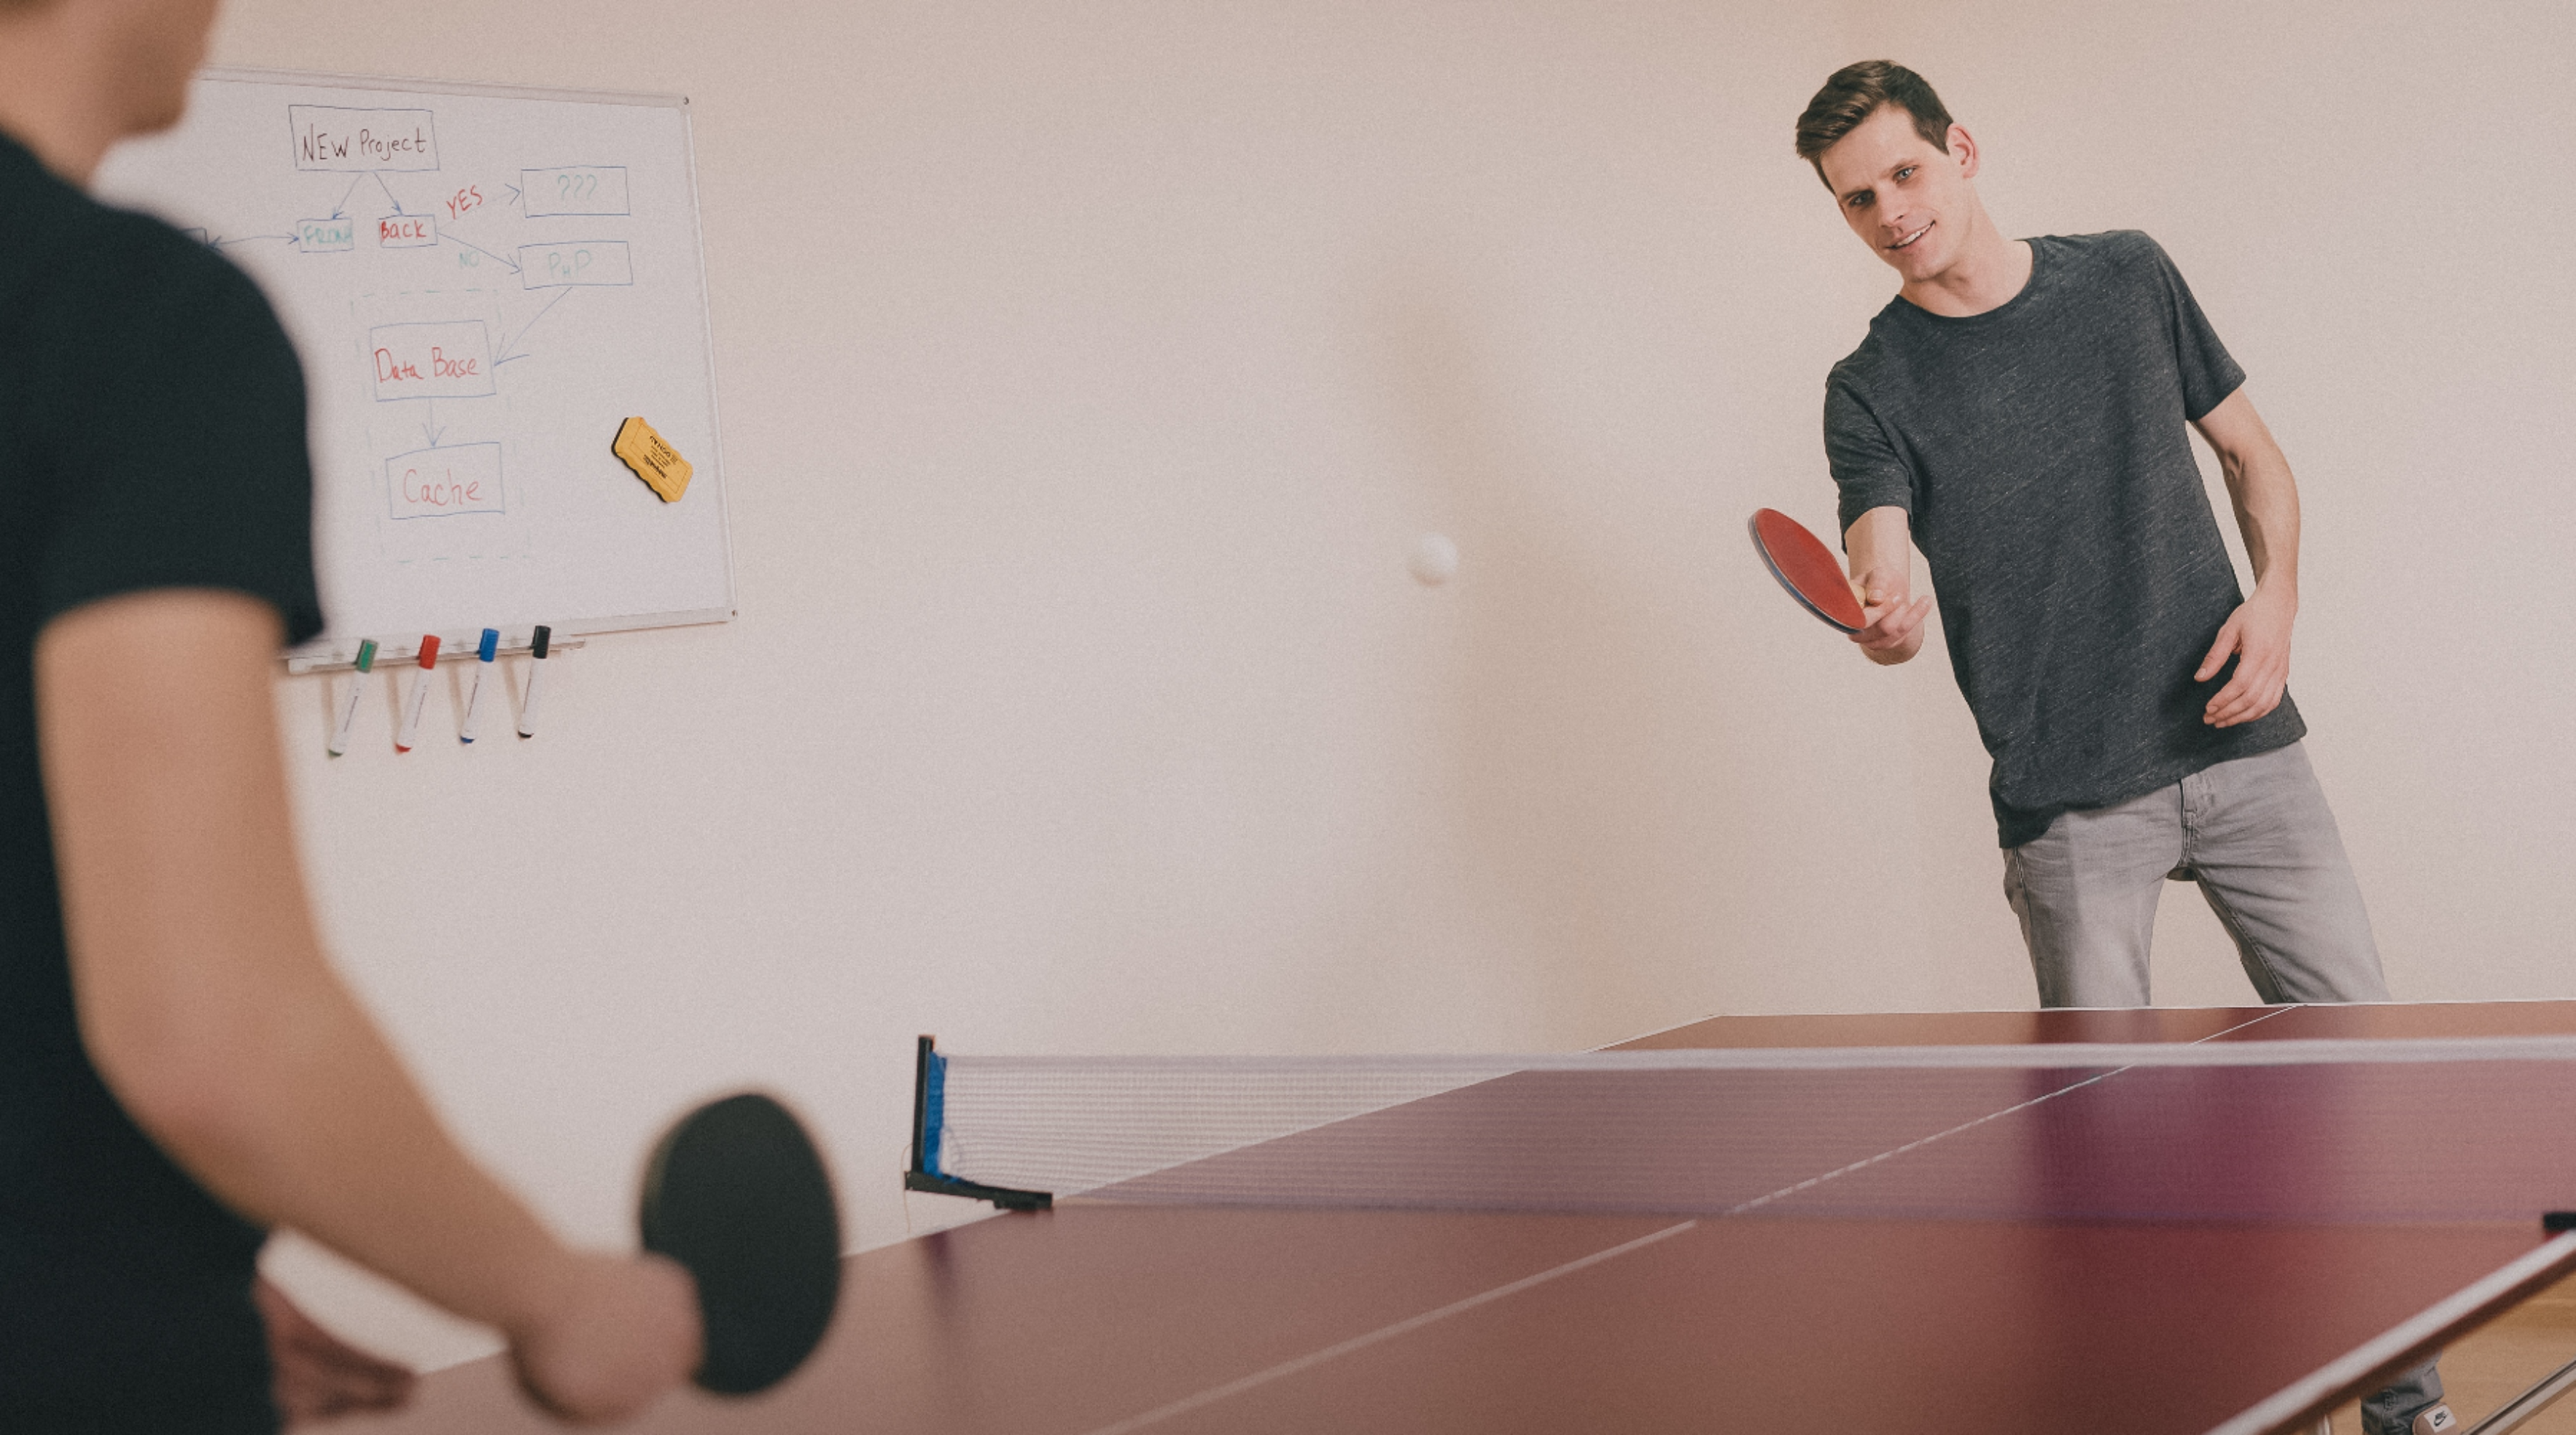 two men playing ping-pong inside room